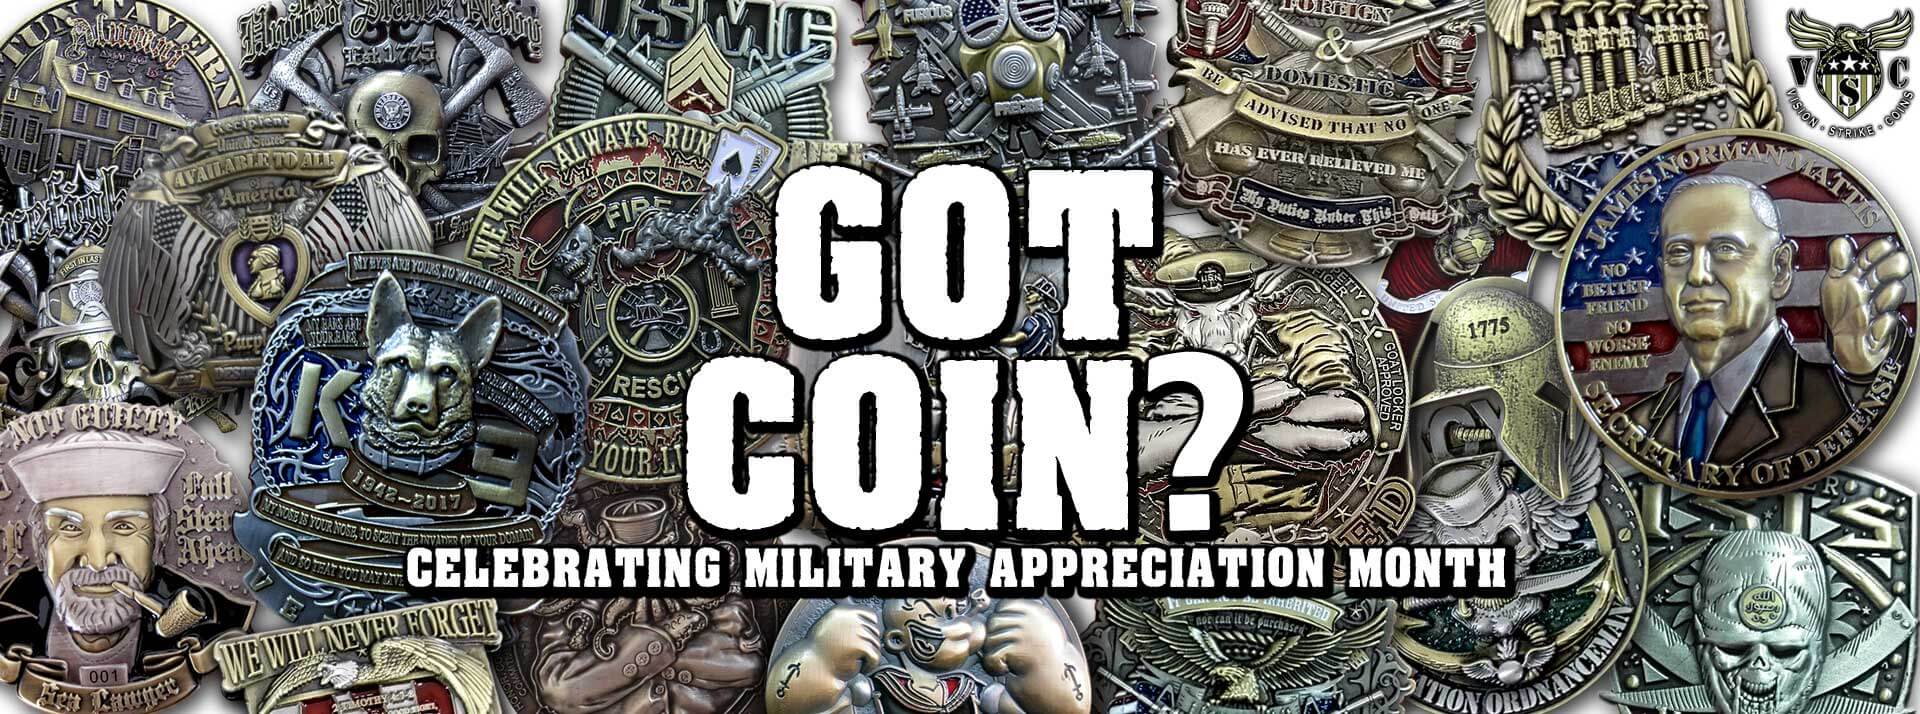 Vision Strike Coins Opens Its Doors to Military Challenge Coins